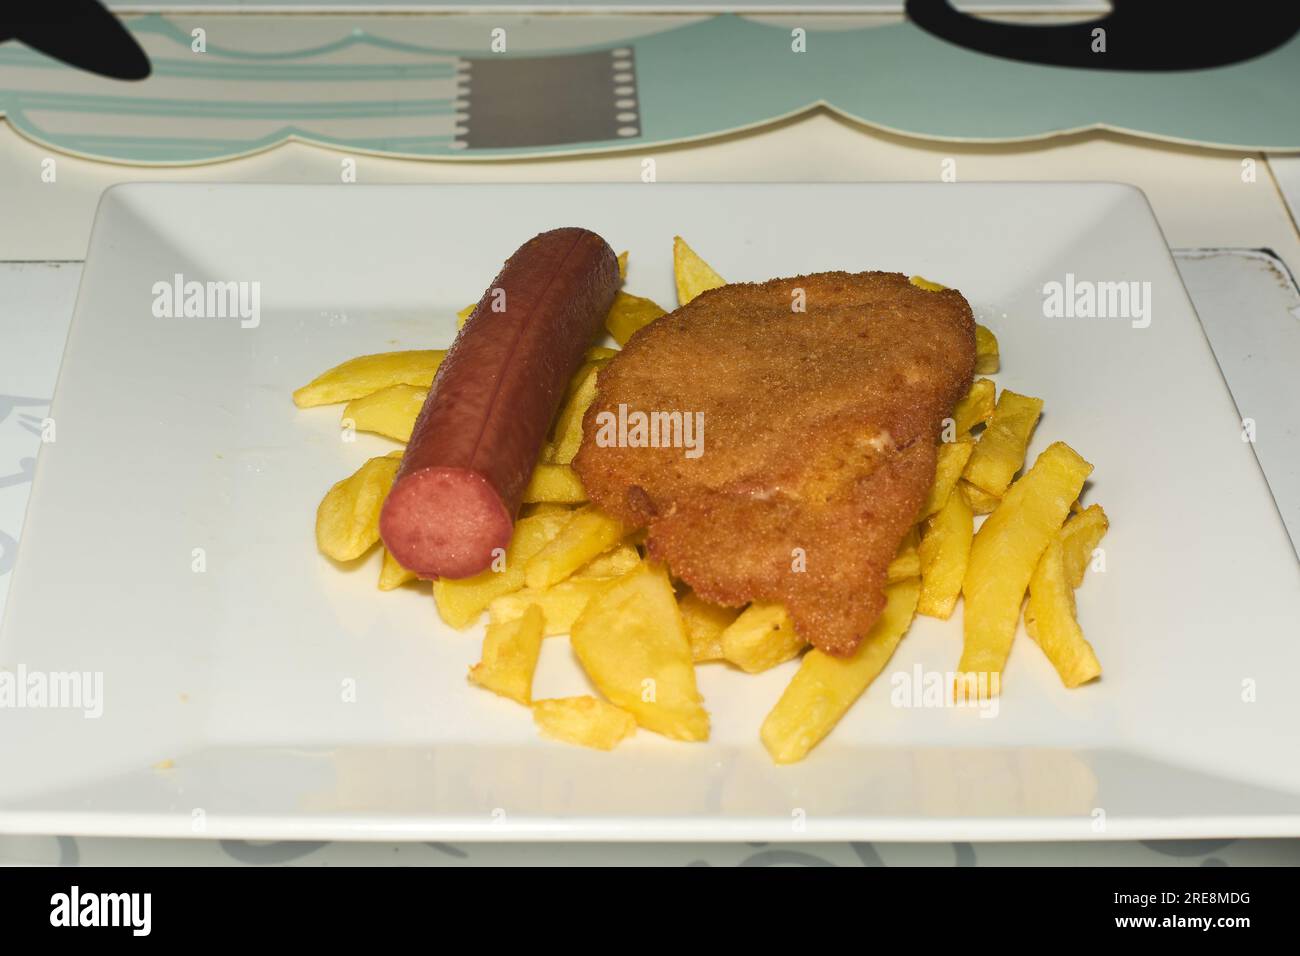 Children's meal plate consisting of fries, half a sausage and a scallop Stock Photo